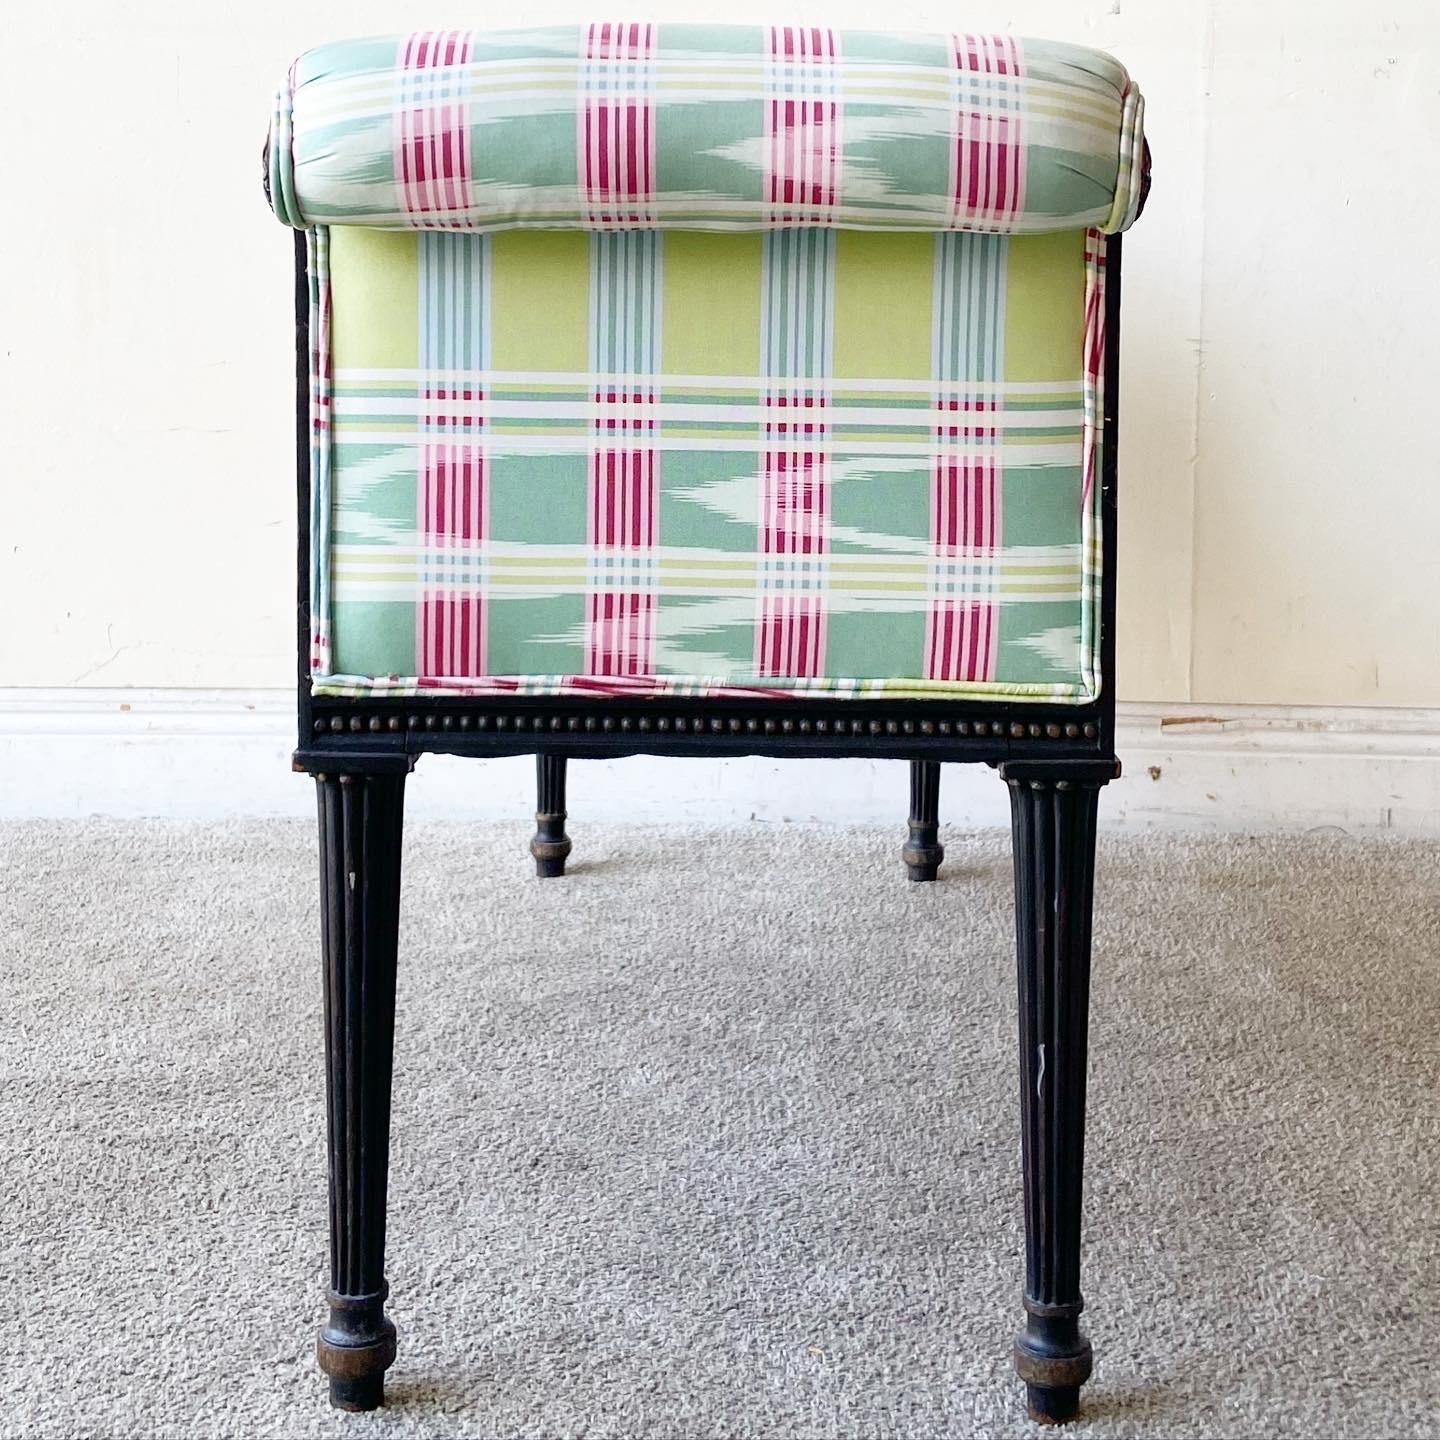 Excellent regency chic bench with scroll arm rests. Features a pink green and blue fabric over a painted wooden frame.
    